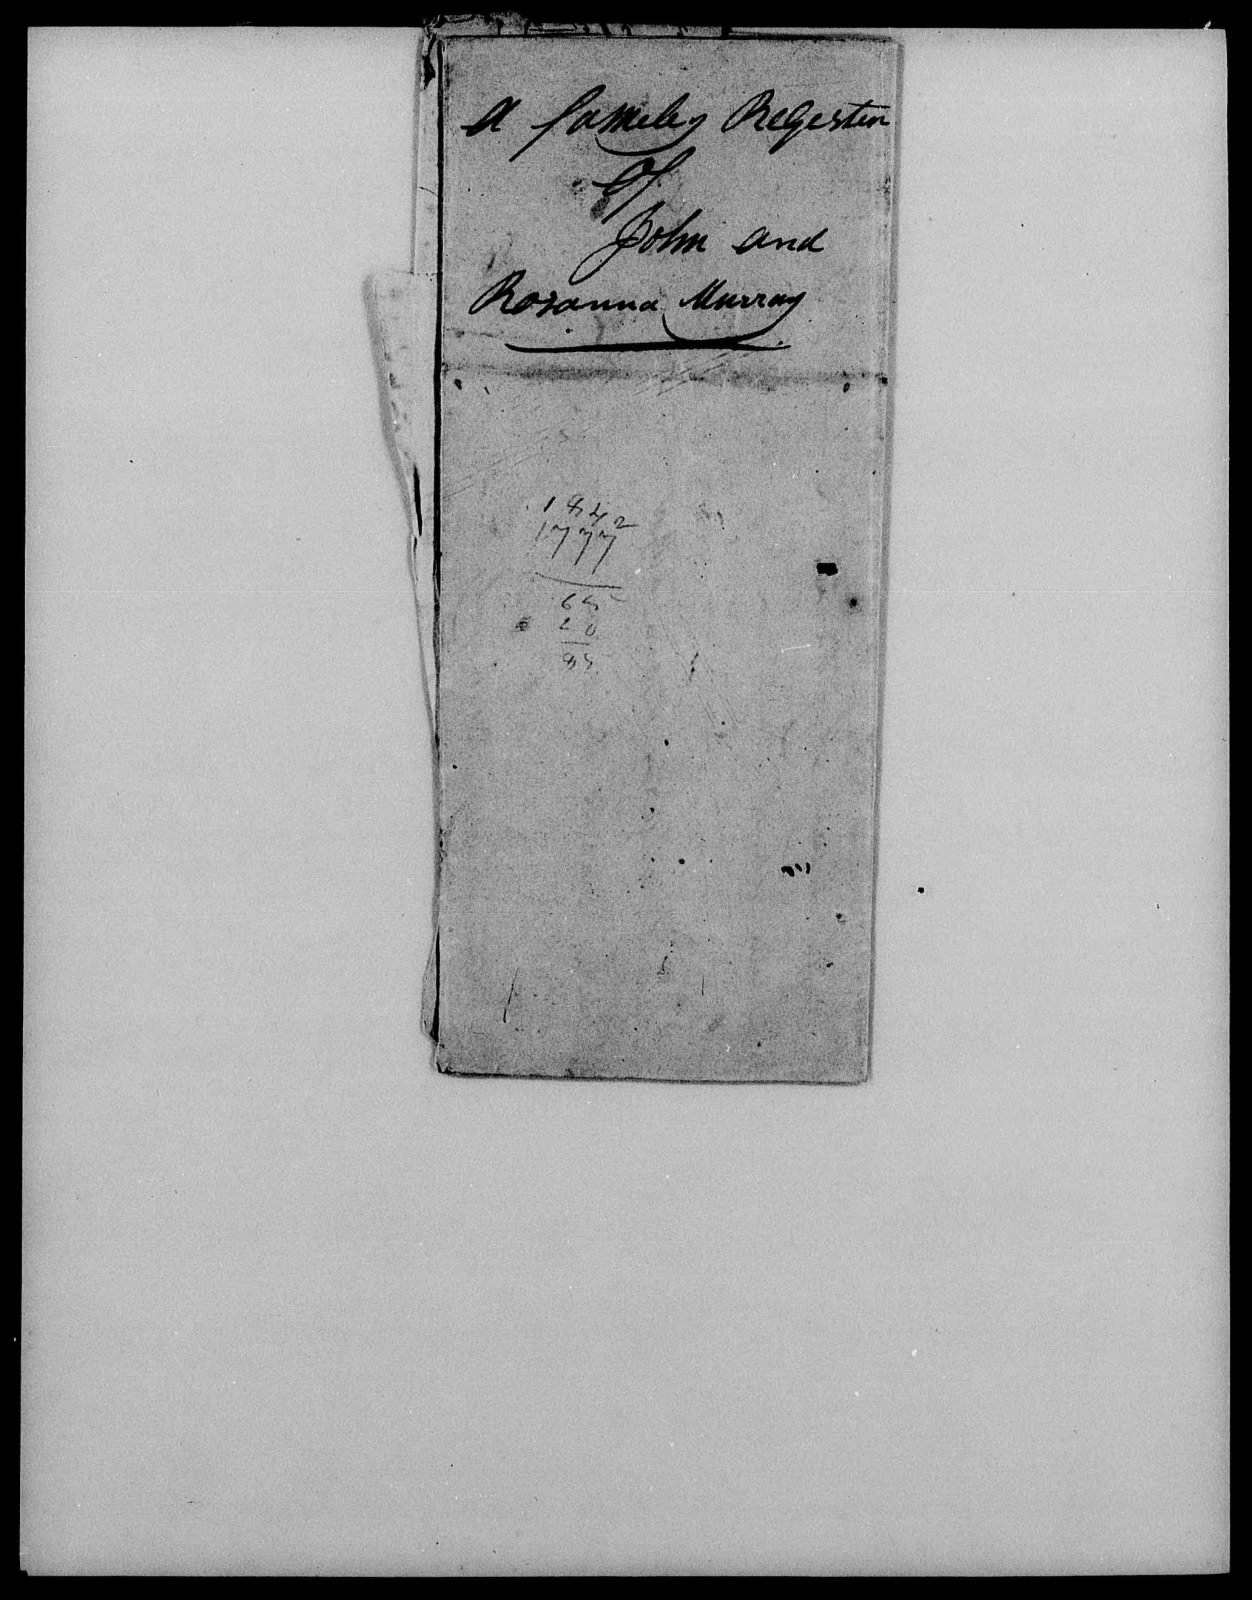 Family Record for John B. Murray and Rosana Murray, 4 October 1777-4 April 1821, page 1